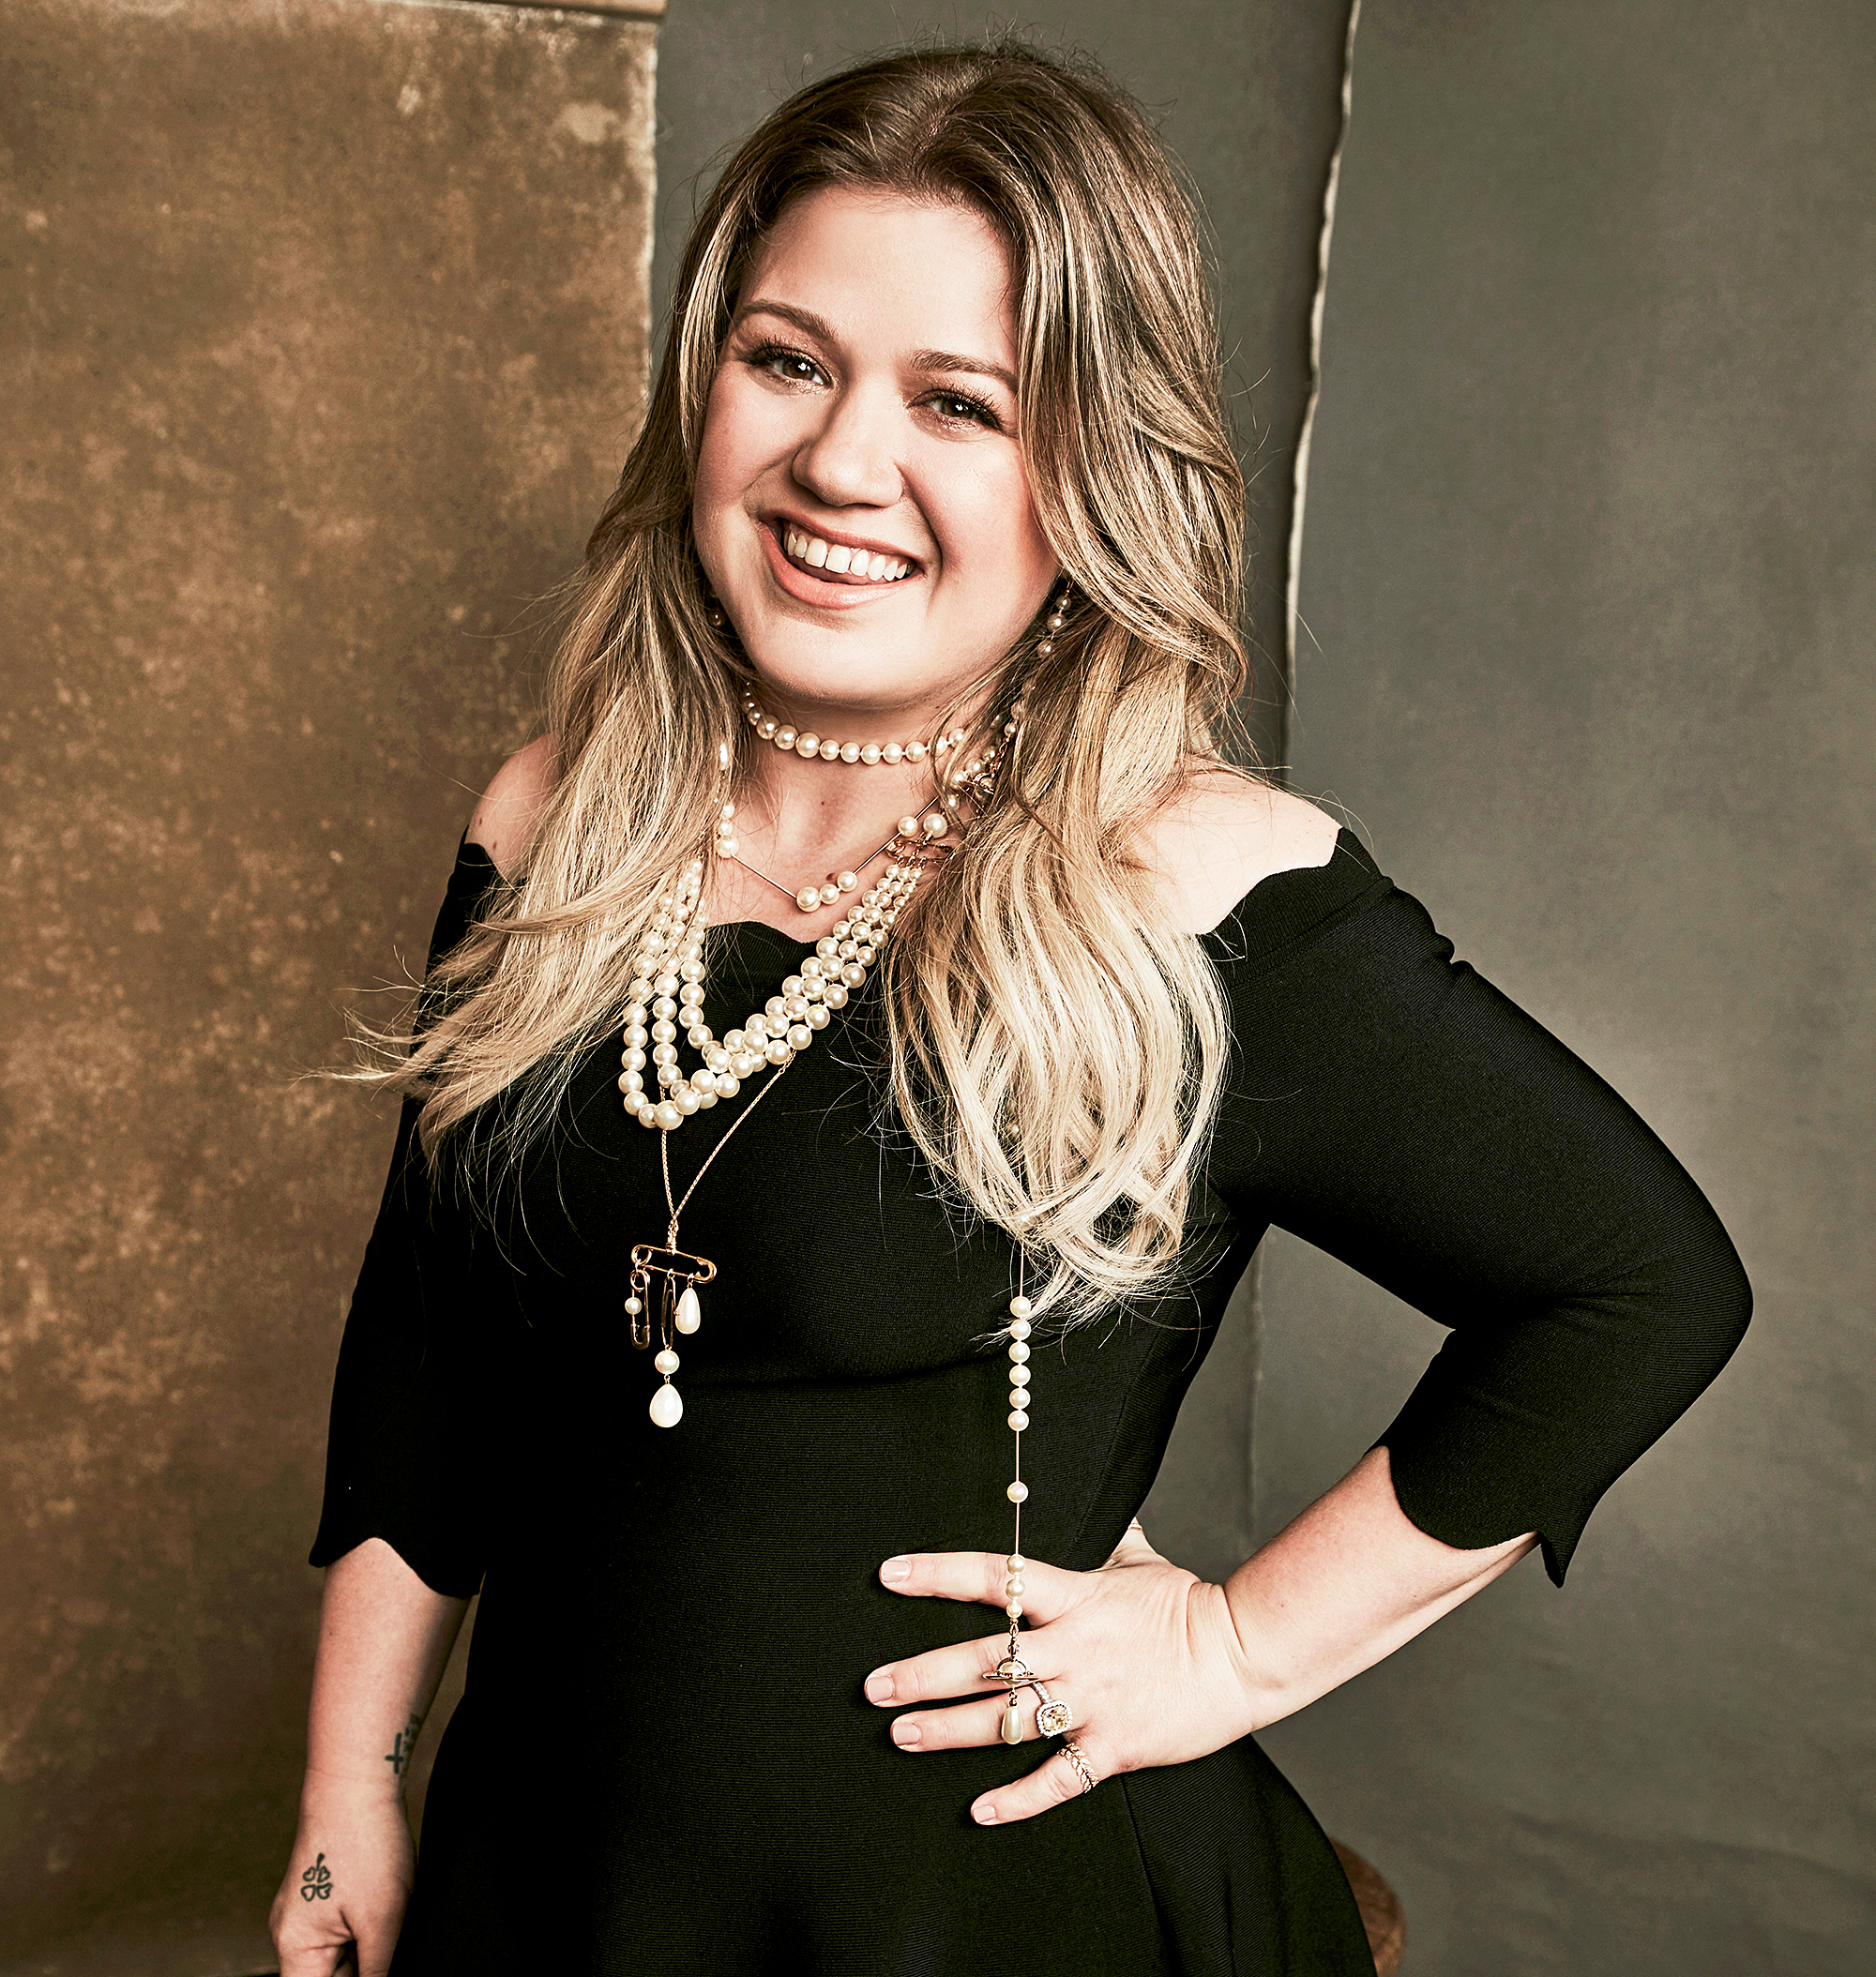 Kelly Clarkson Faces Backlash for Spanking Daughter picture